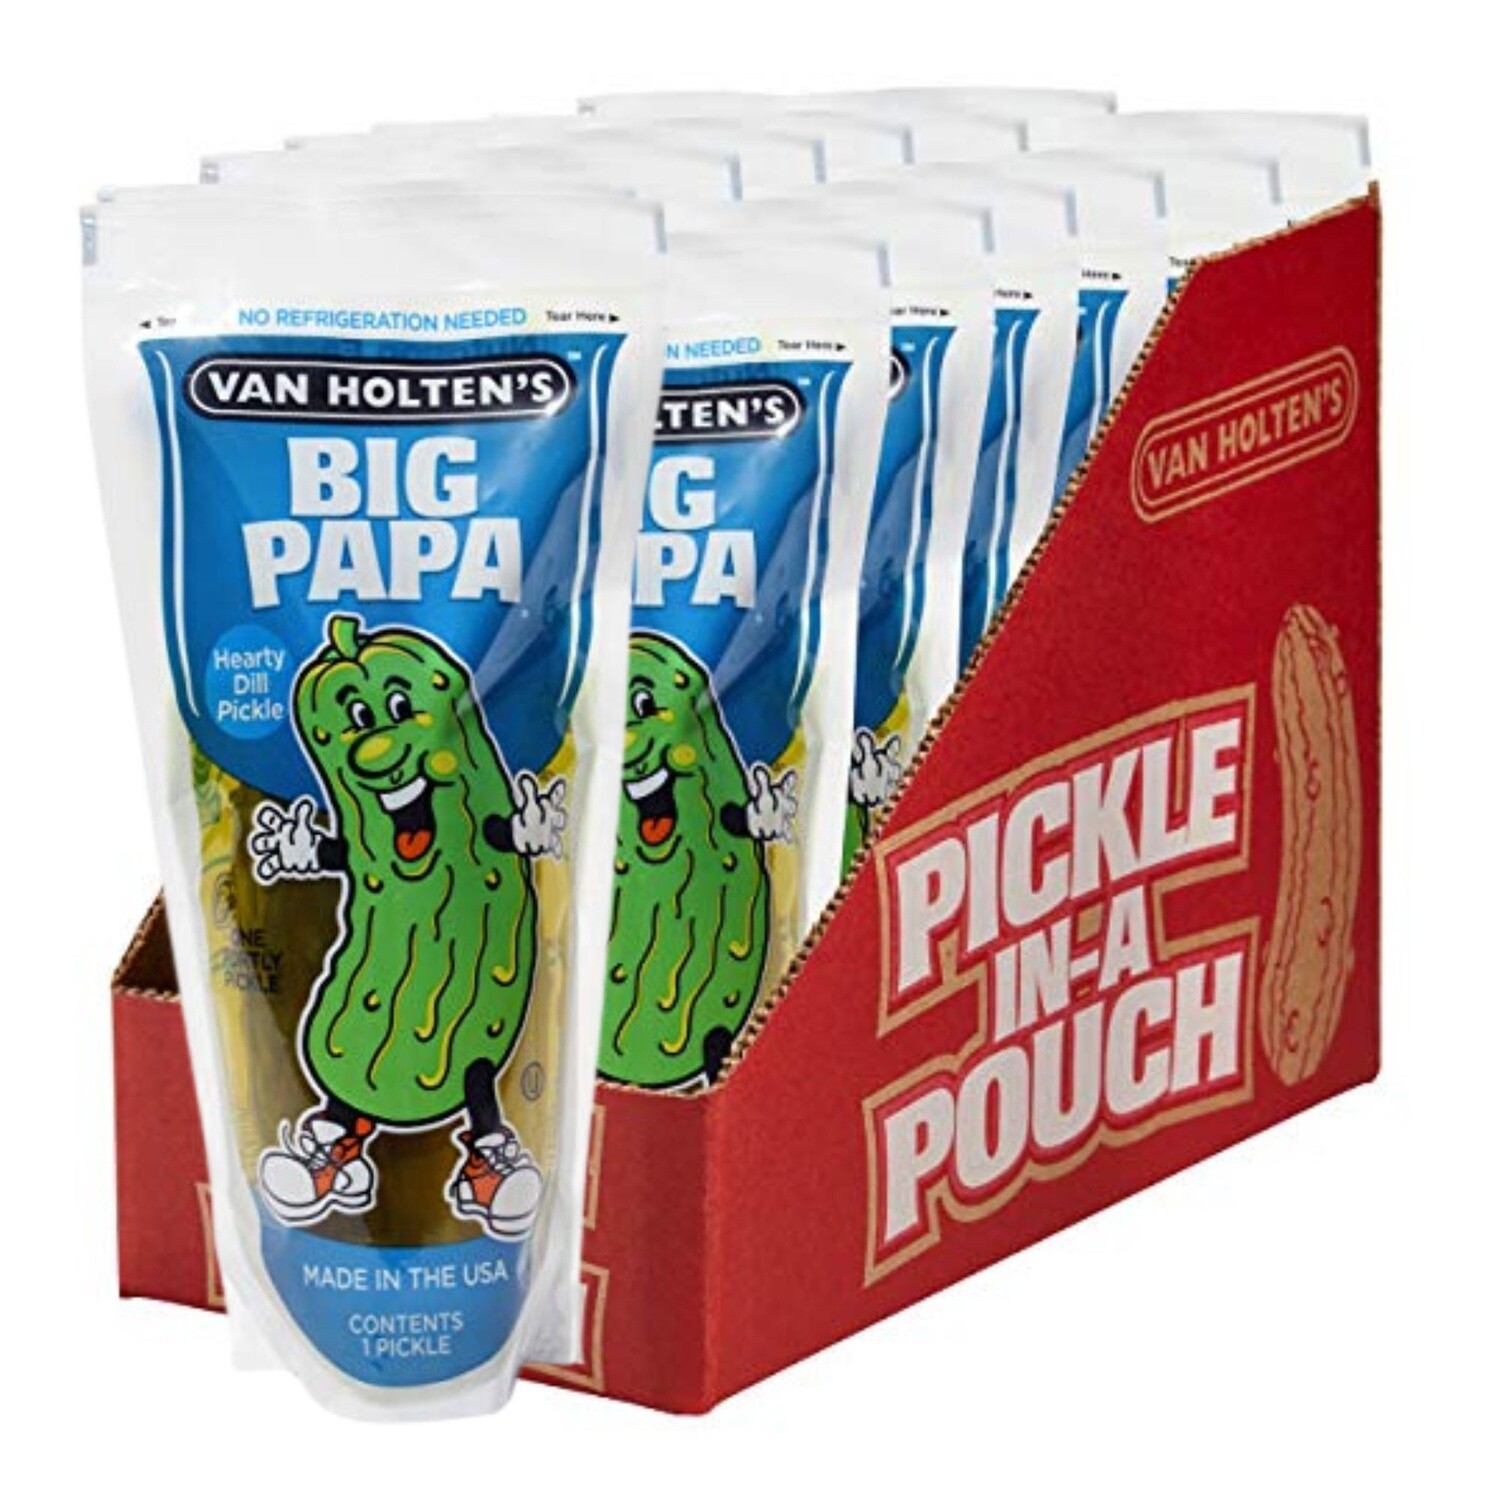 Pickle in a Pouch - Big Papa, Quantity: x 1